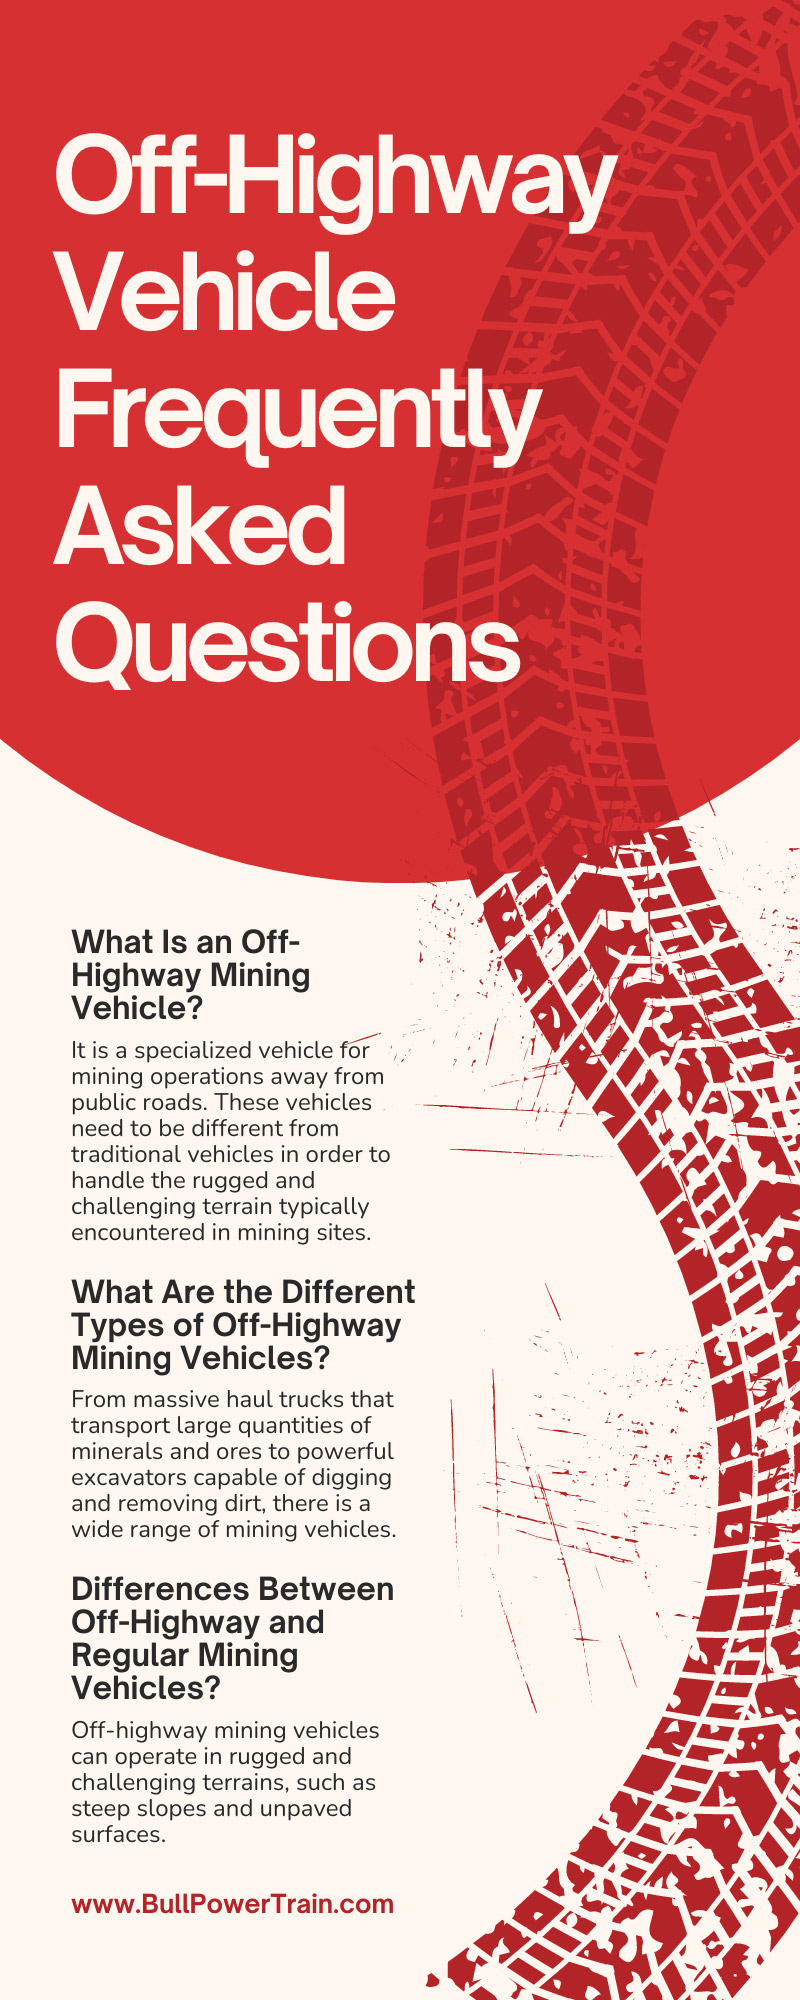 Off-Highway Vehicle Frequently Asked Questions